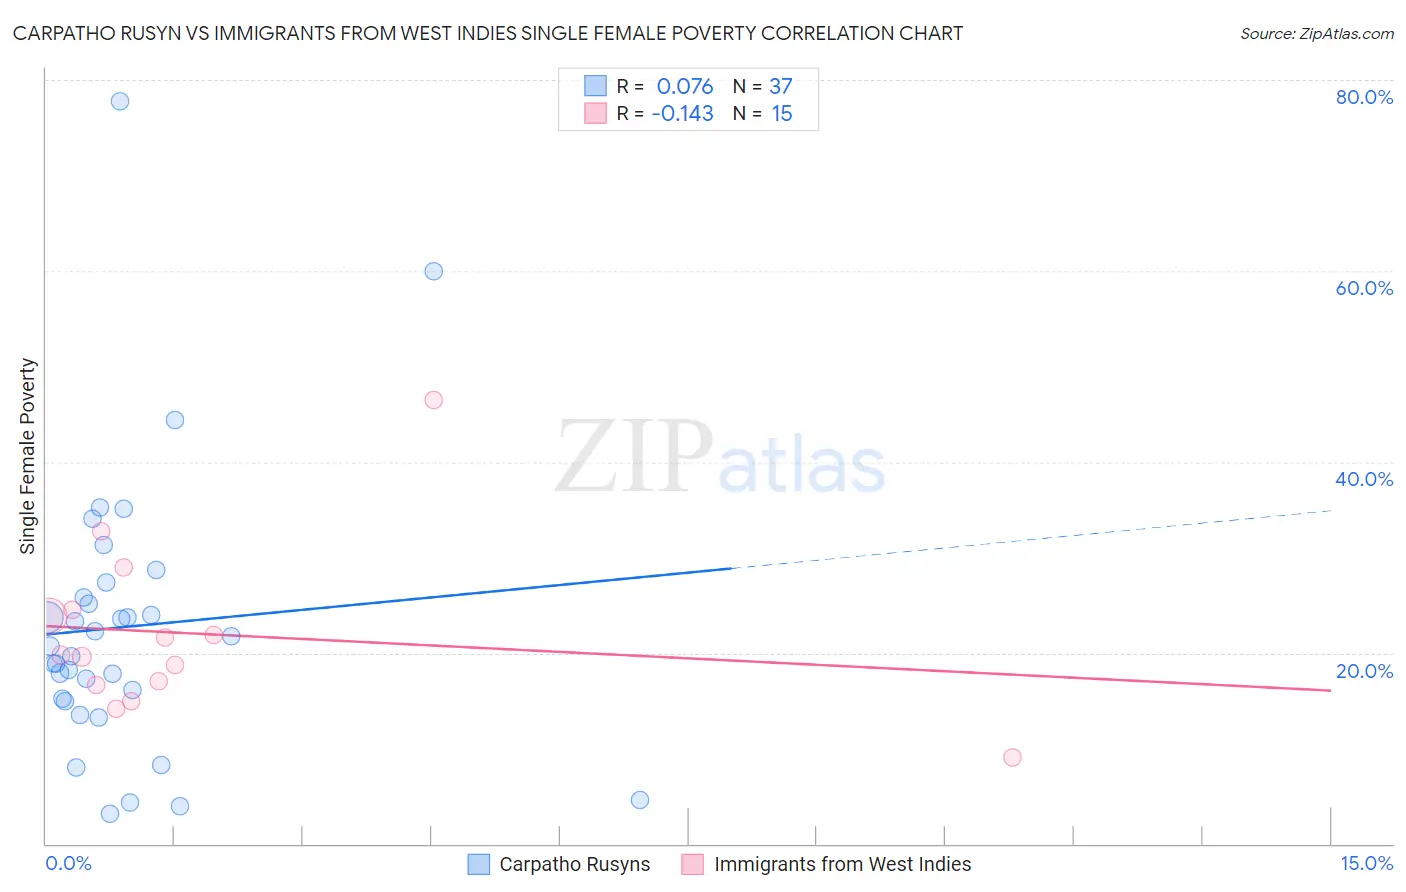 Carpatho Rusyn vs Immigrants from West Indies Single Female Poverty